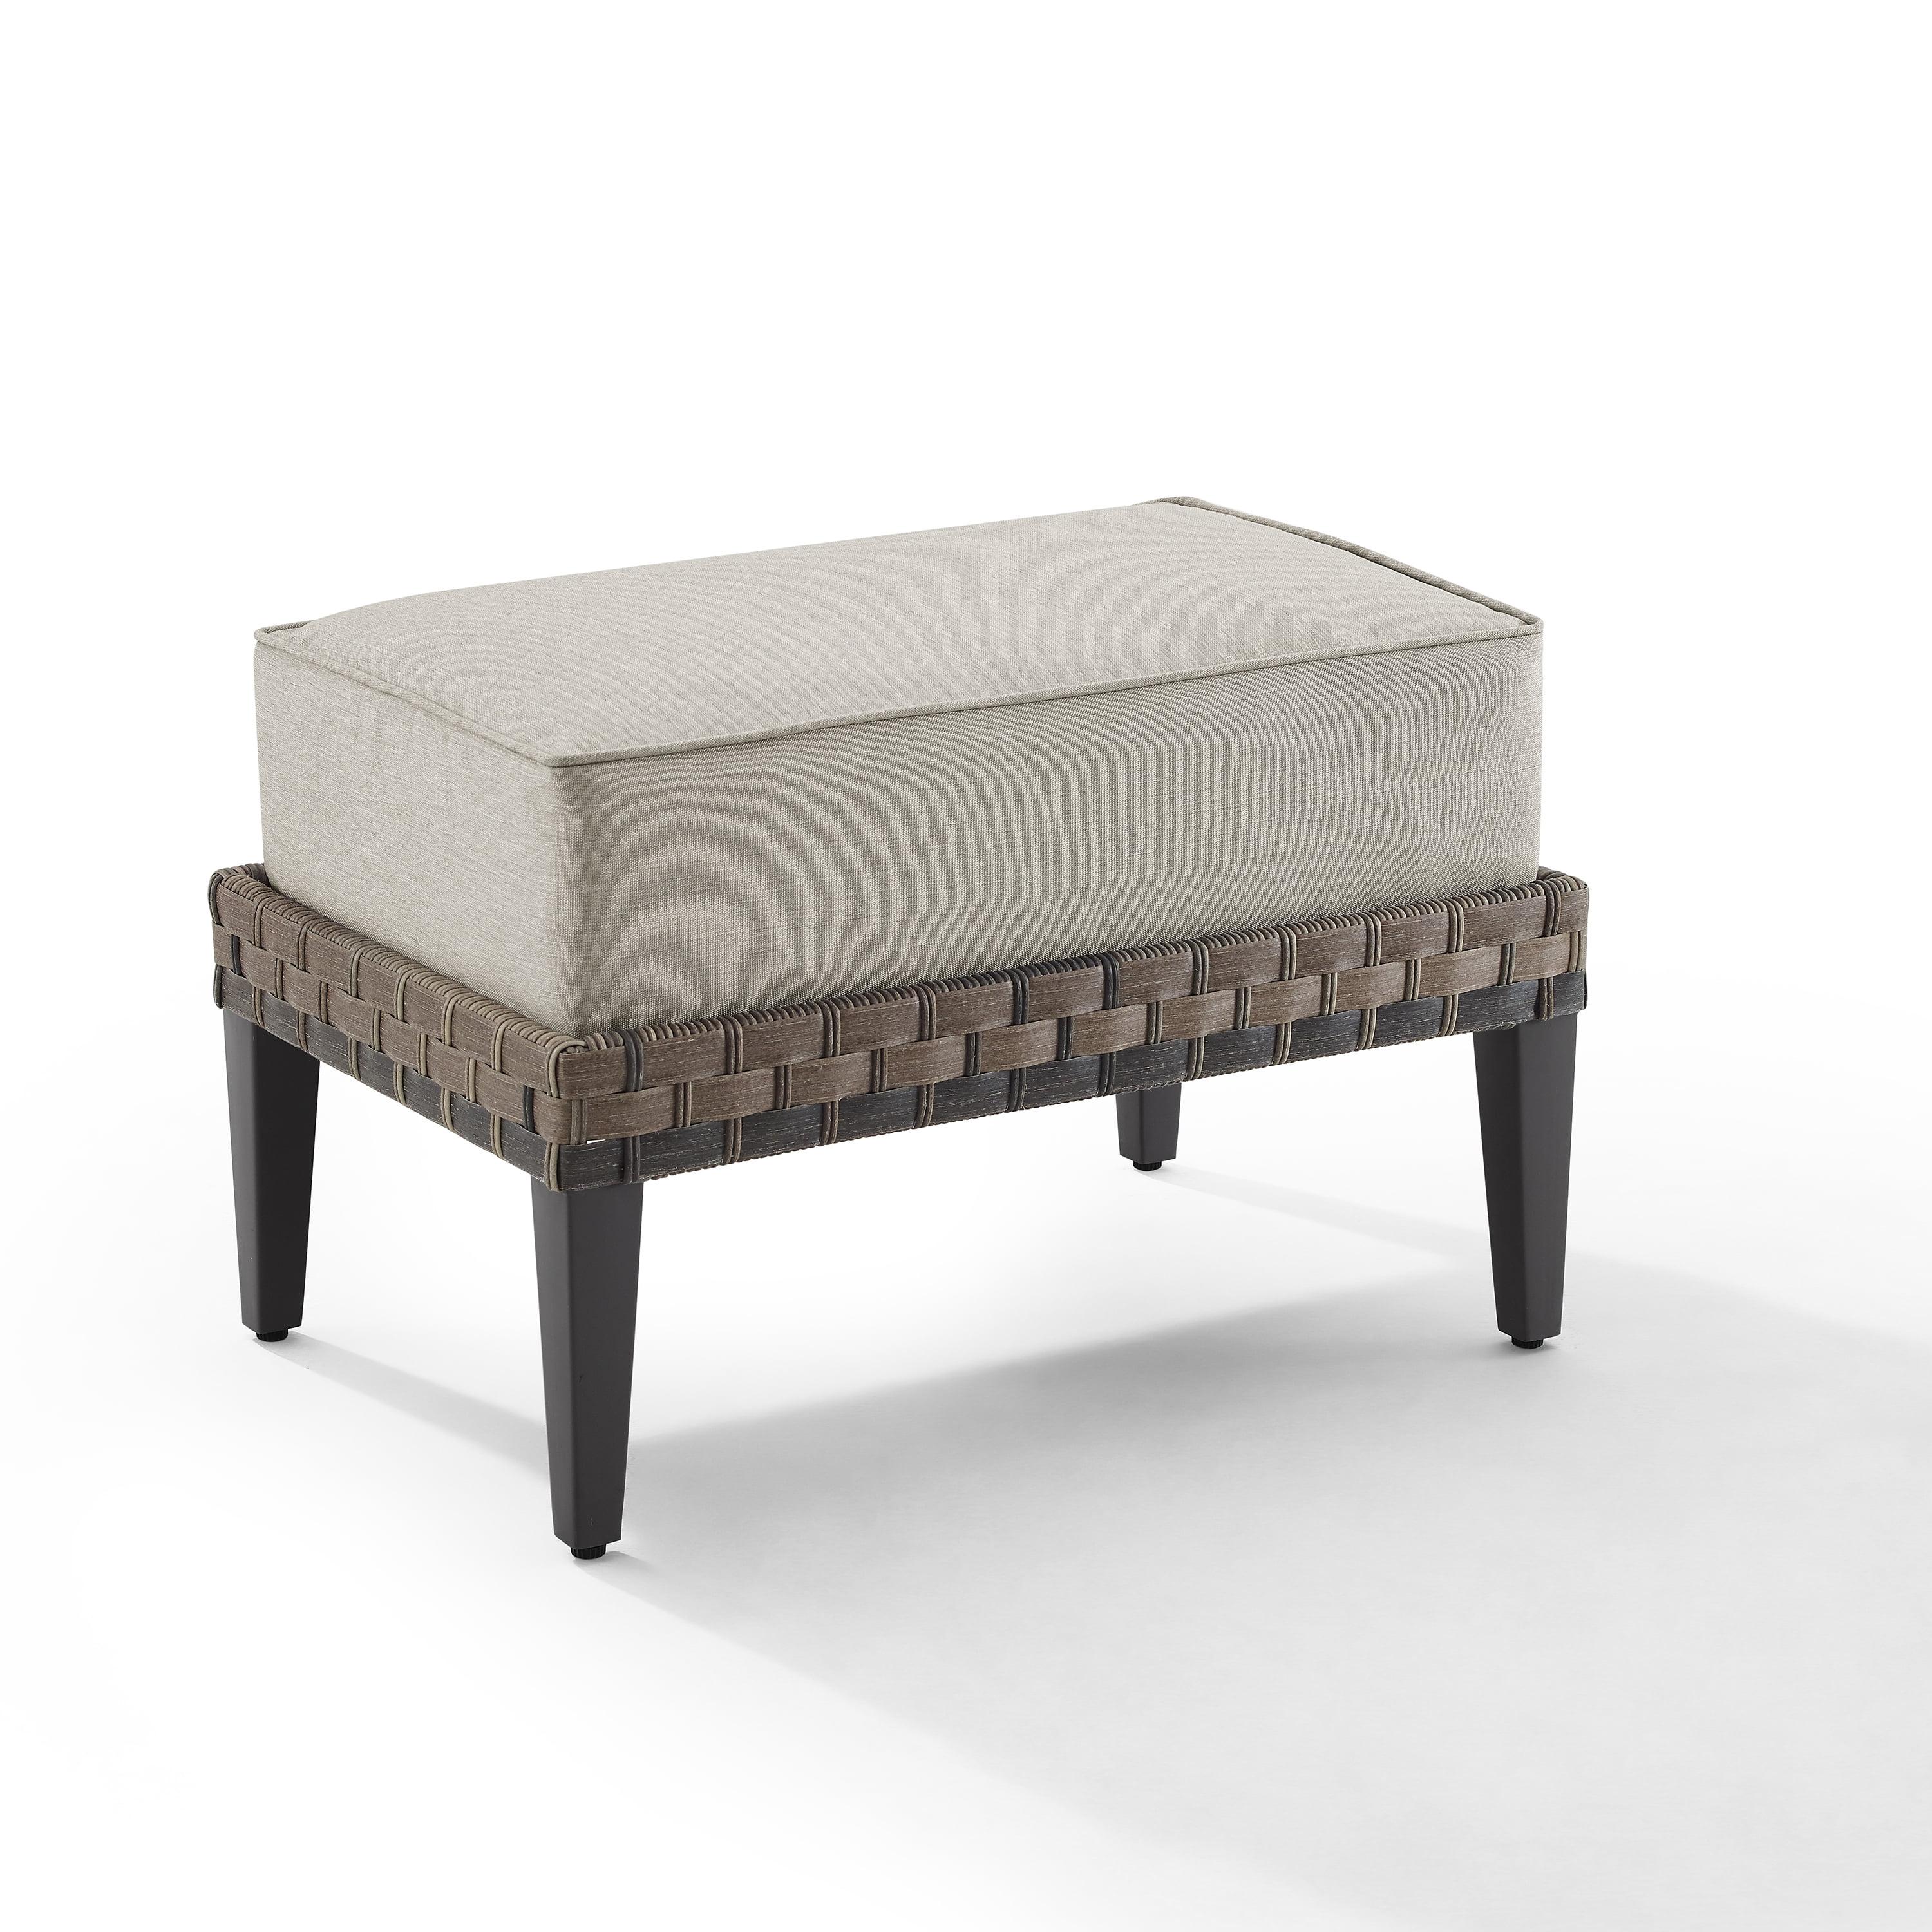 Prescott All-Weather Wicker Outdoor Ottoman in Taupe with Moisture-Resistant Cushion